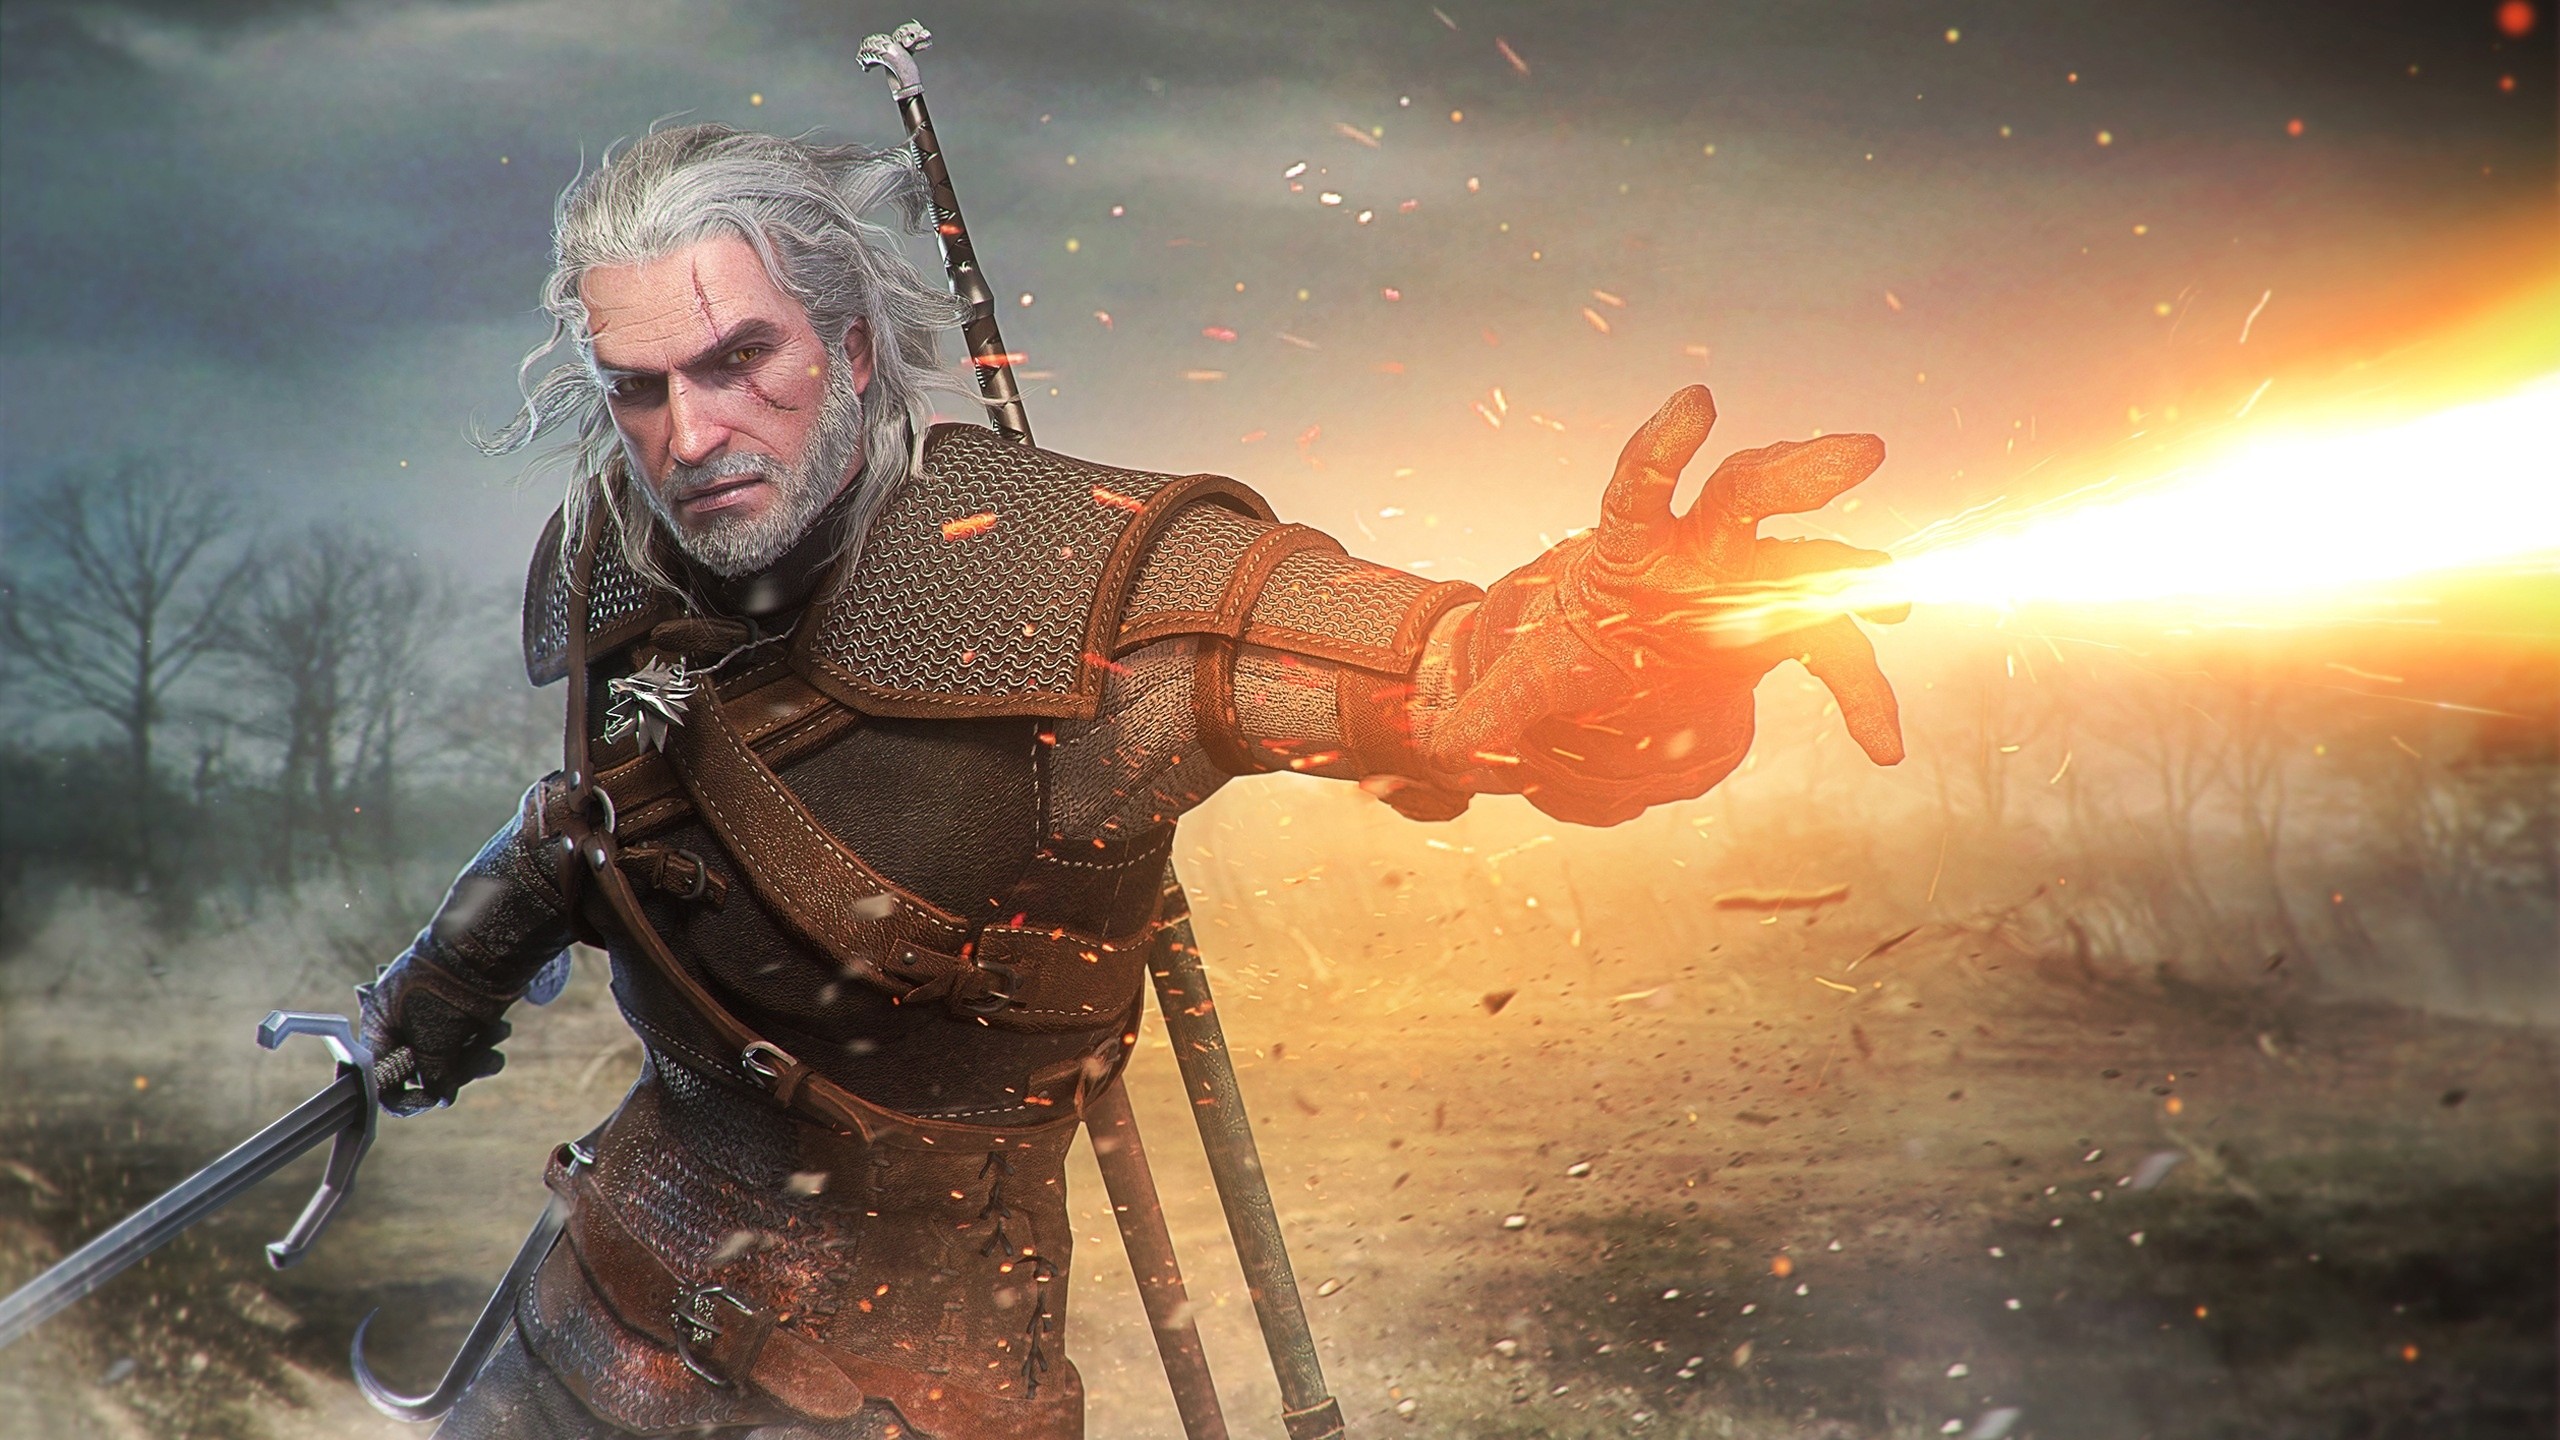 2560x1440 Geralt Of Rivia The Witcher 3 Game Art